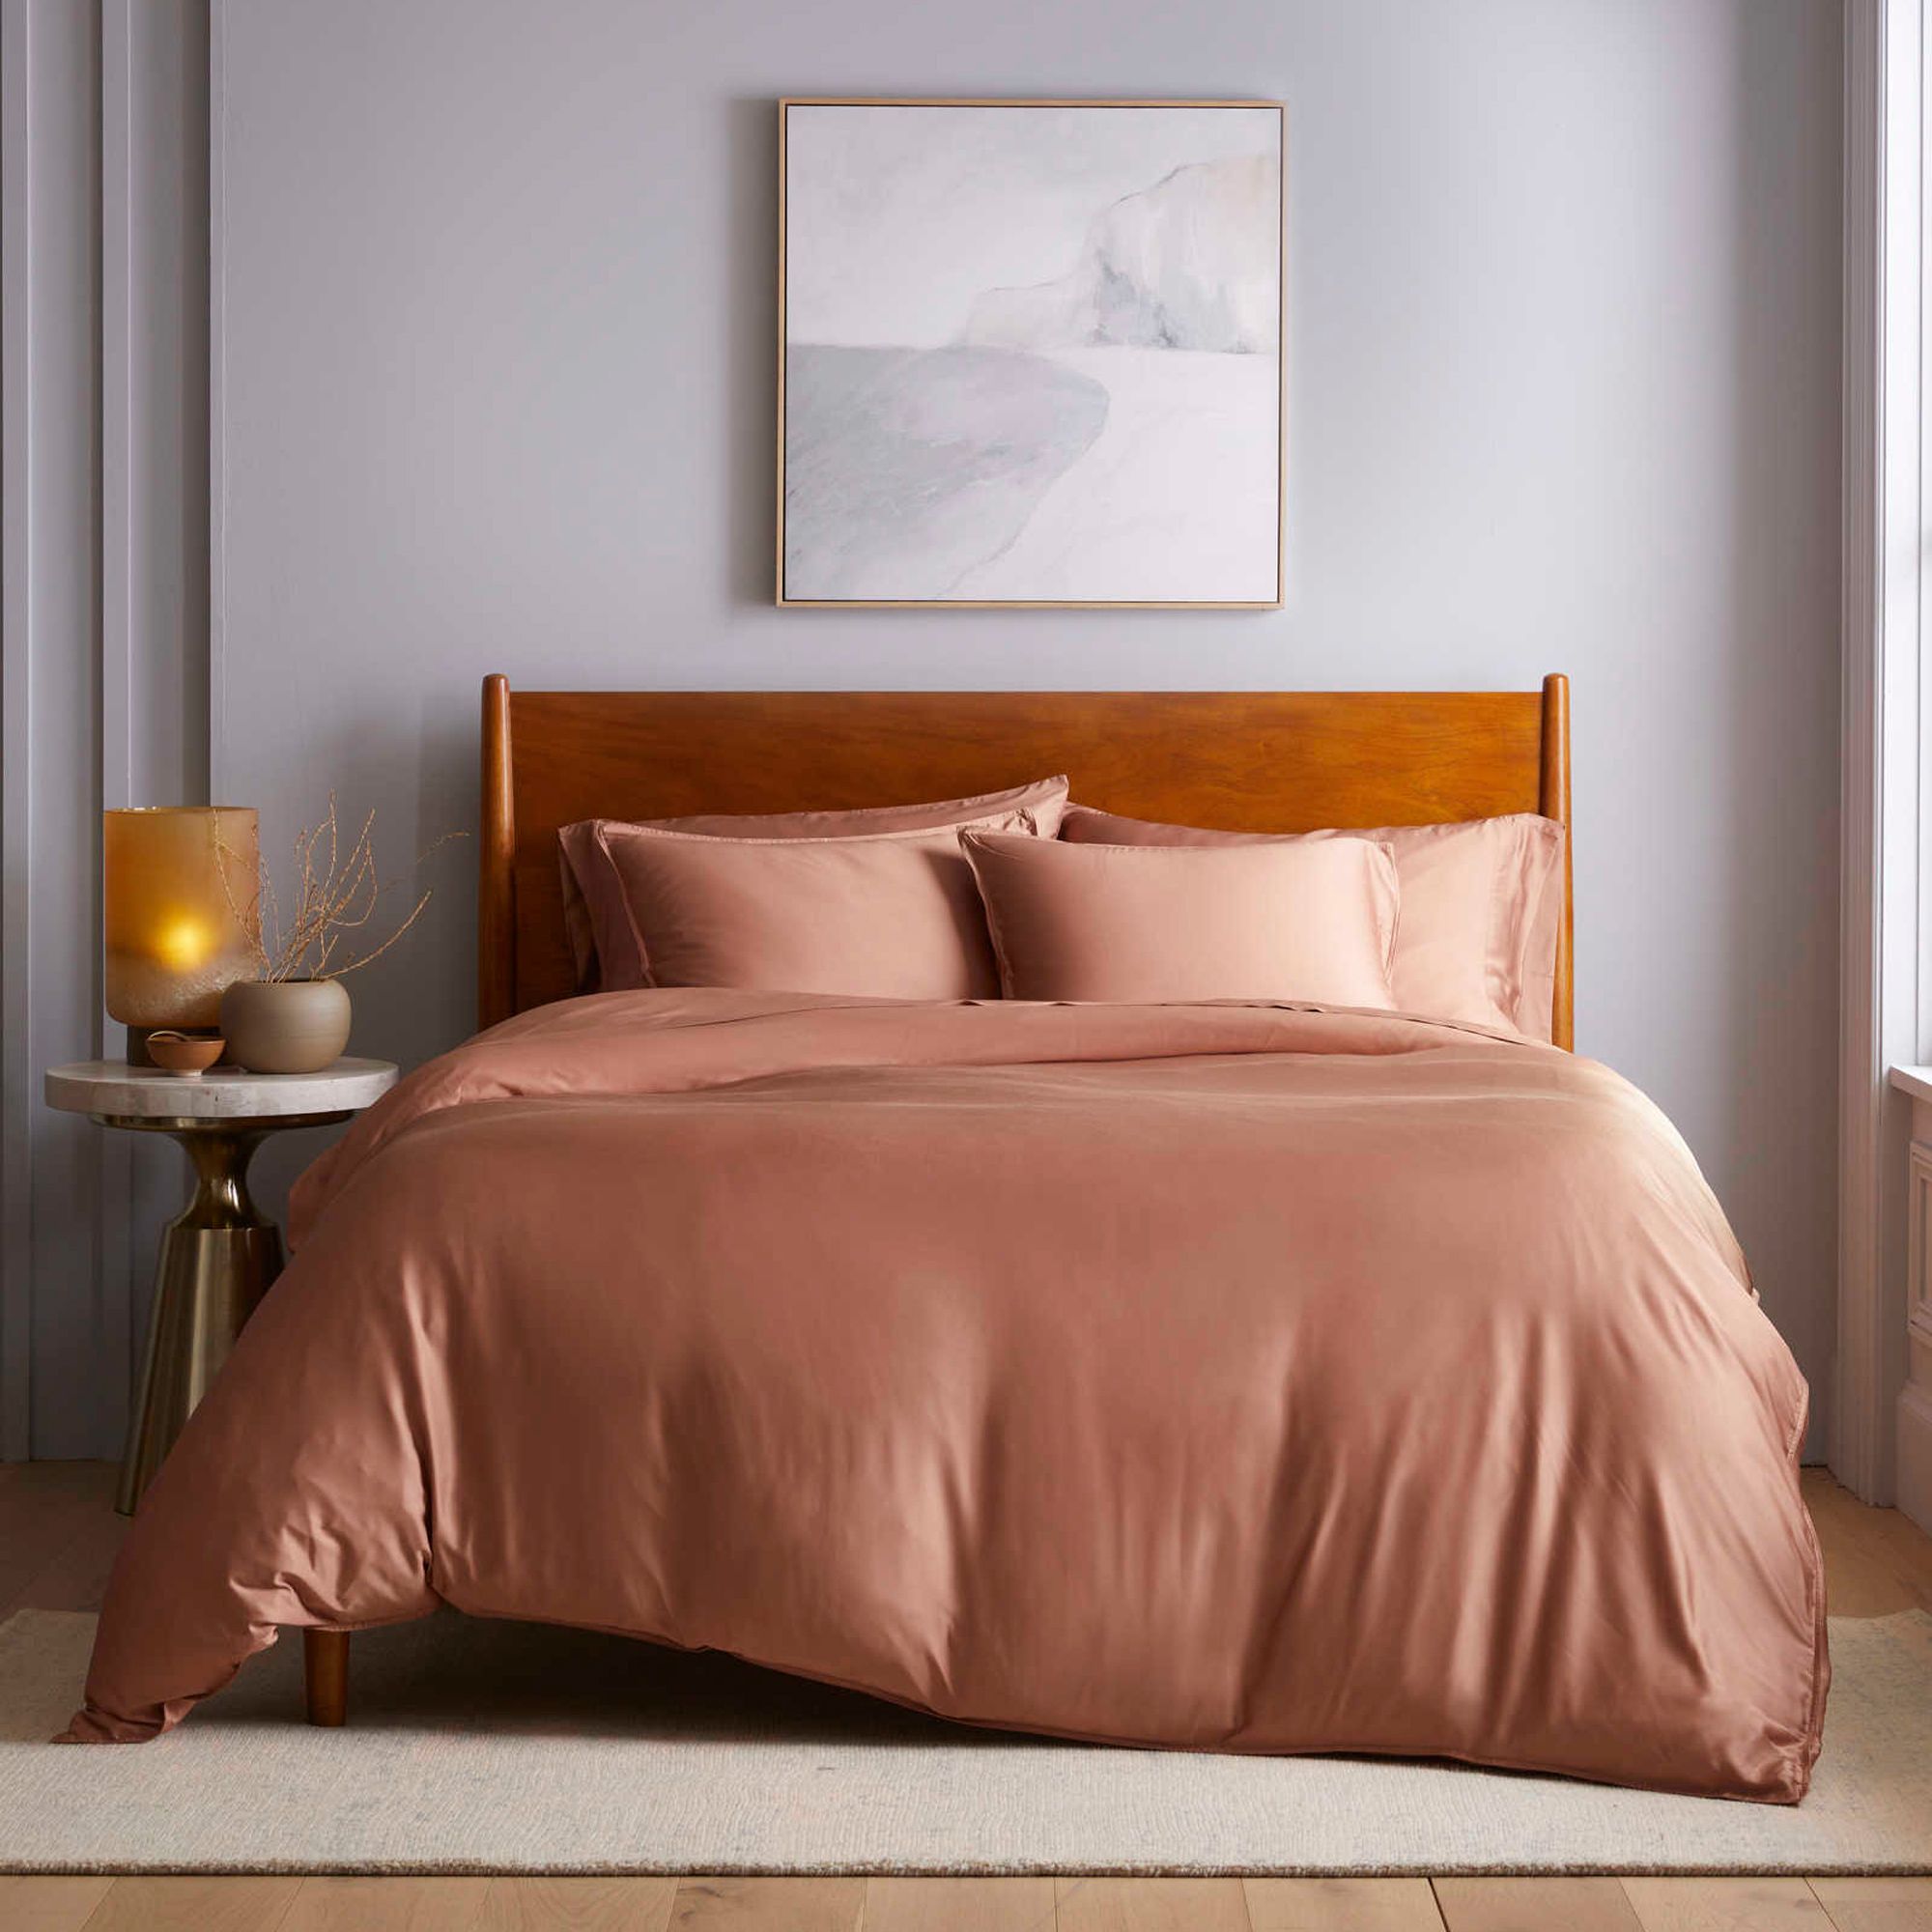 Cariloha Sheets are Best Deep-Pocket Sheets by Cosmopolitan